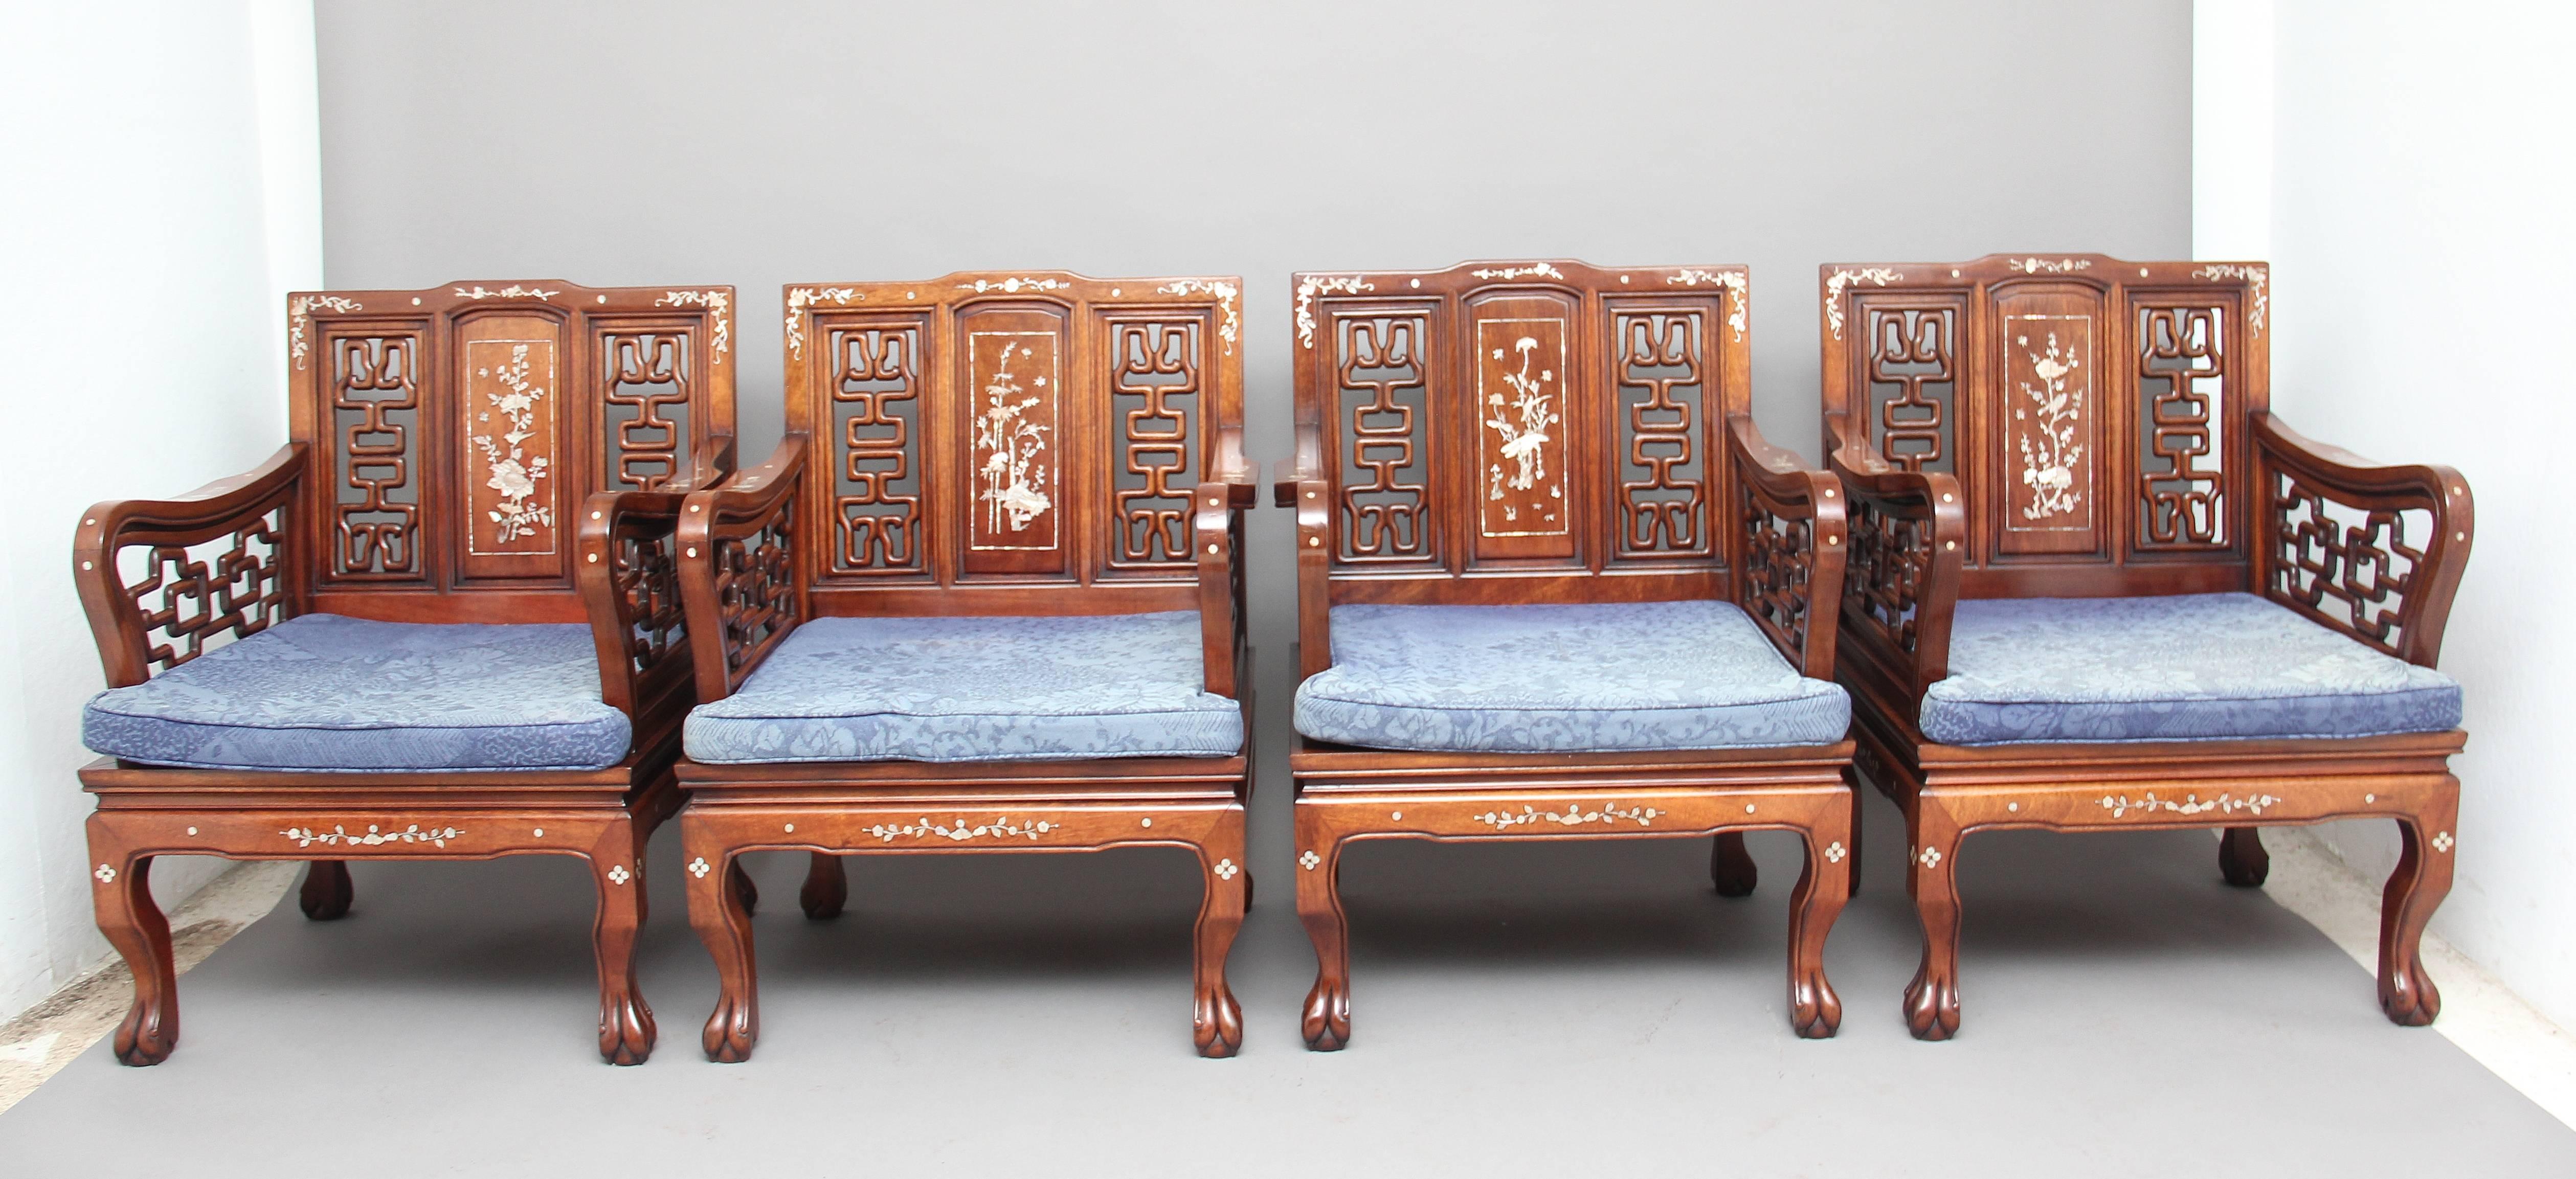 Early 20th Century Chinese Five-Piece Suite 5